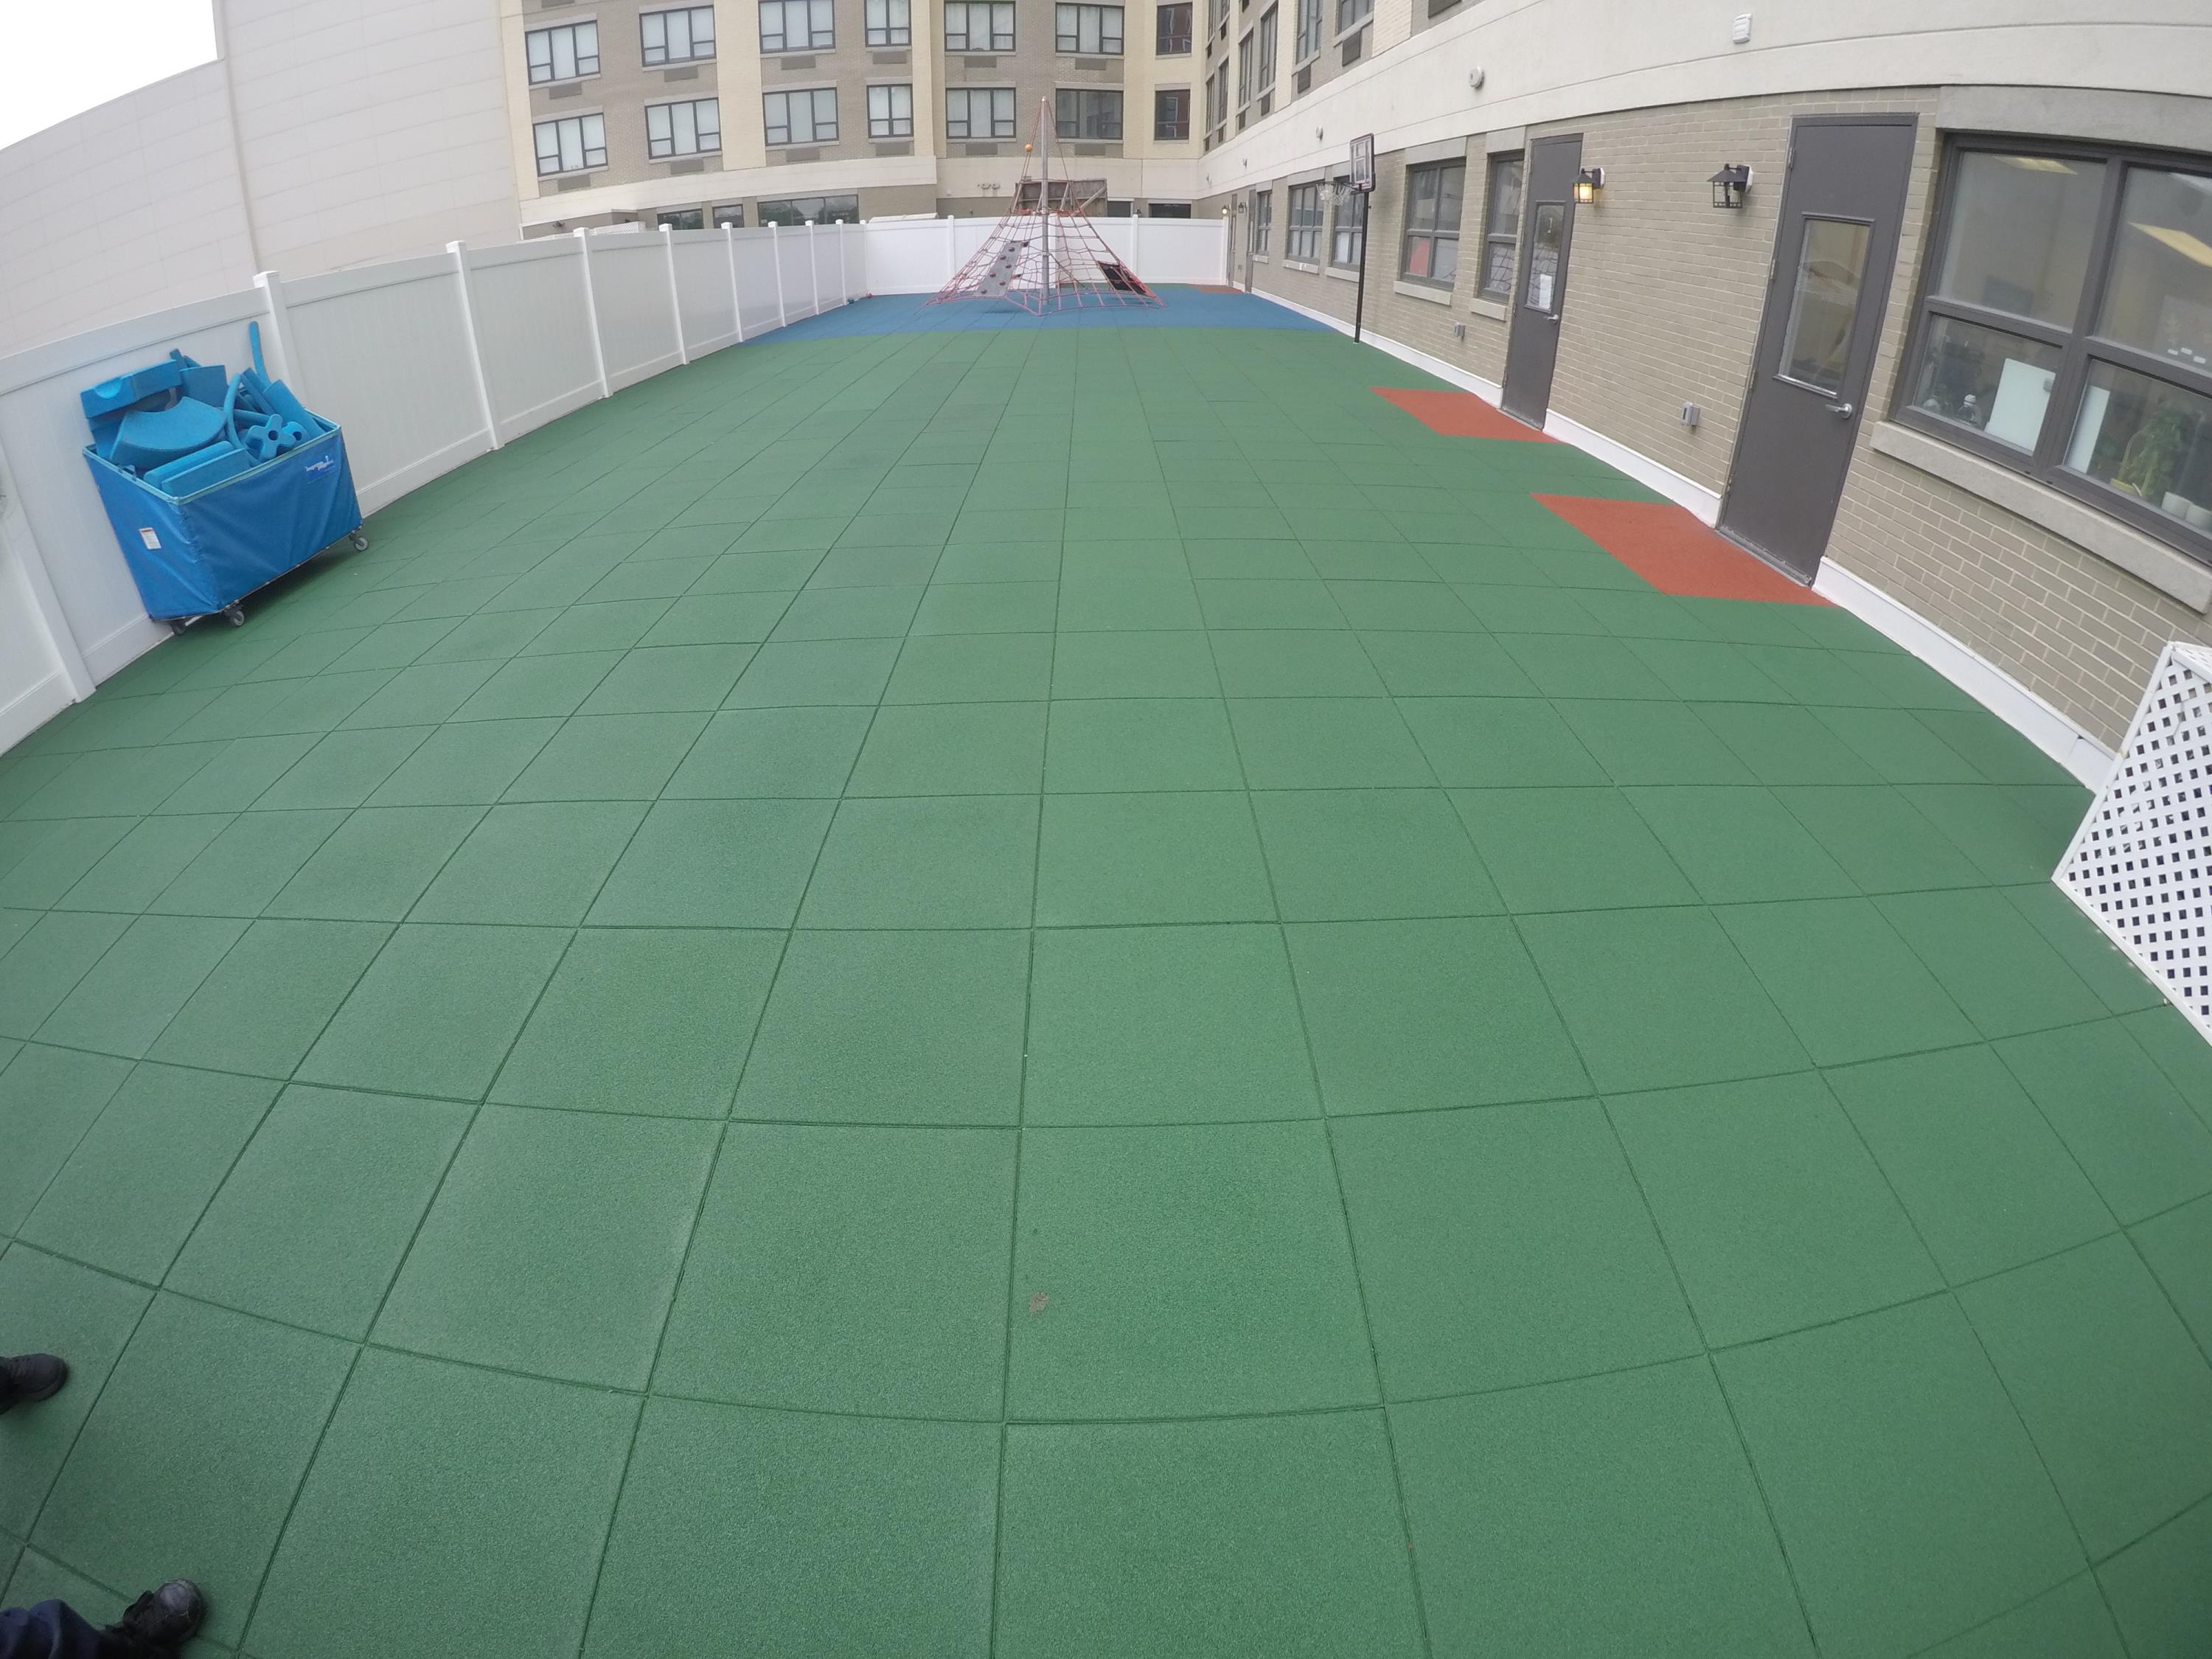 Unity Surfacing's Play-Land Tiles at this daycare center